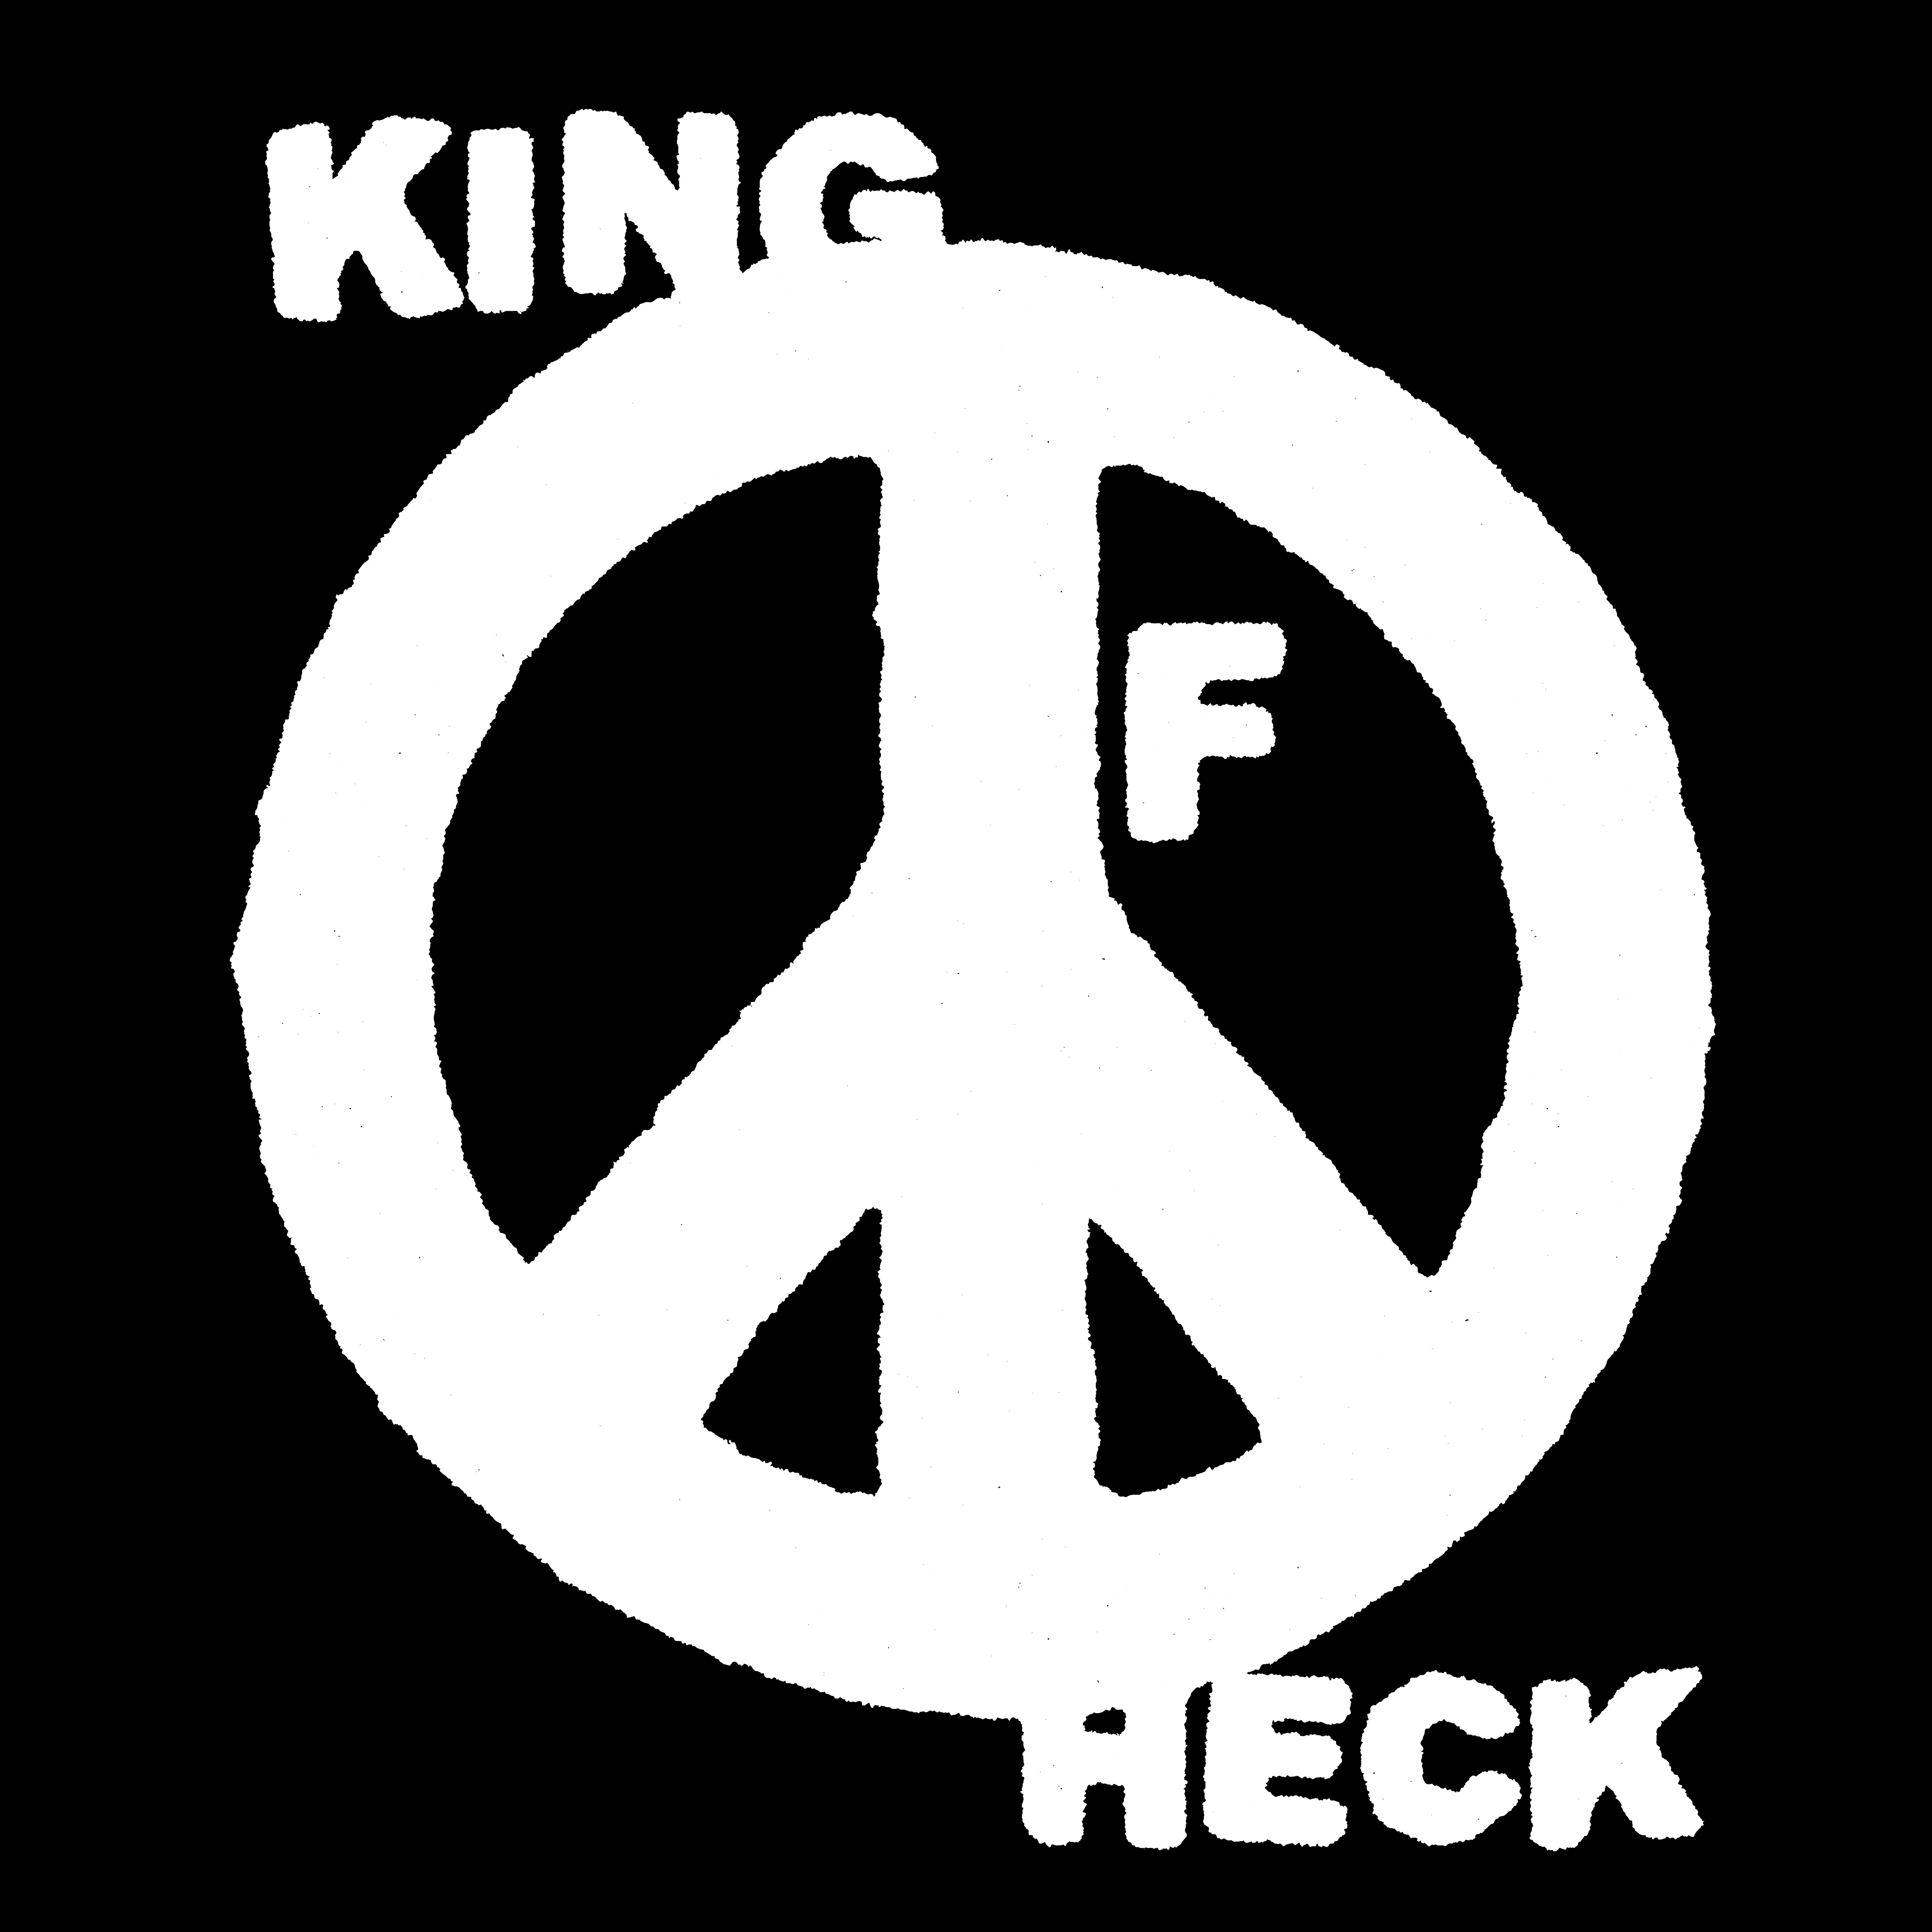 King of heck peace and love